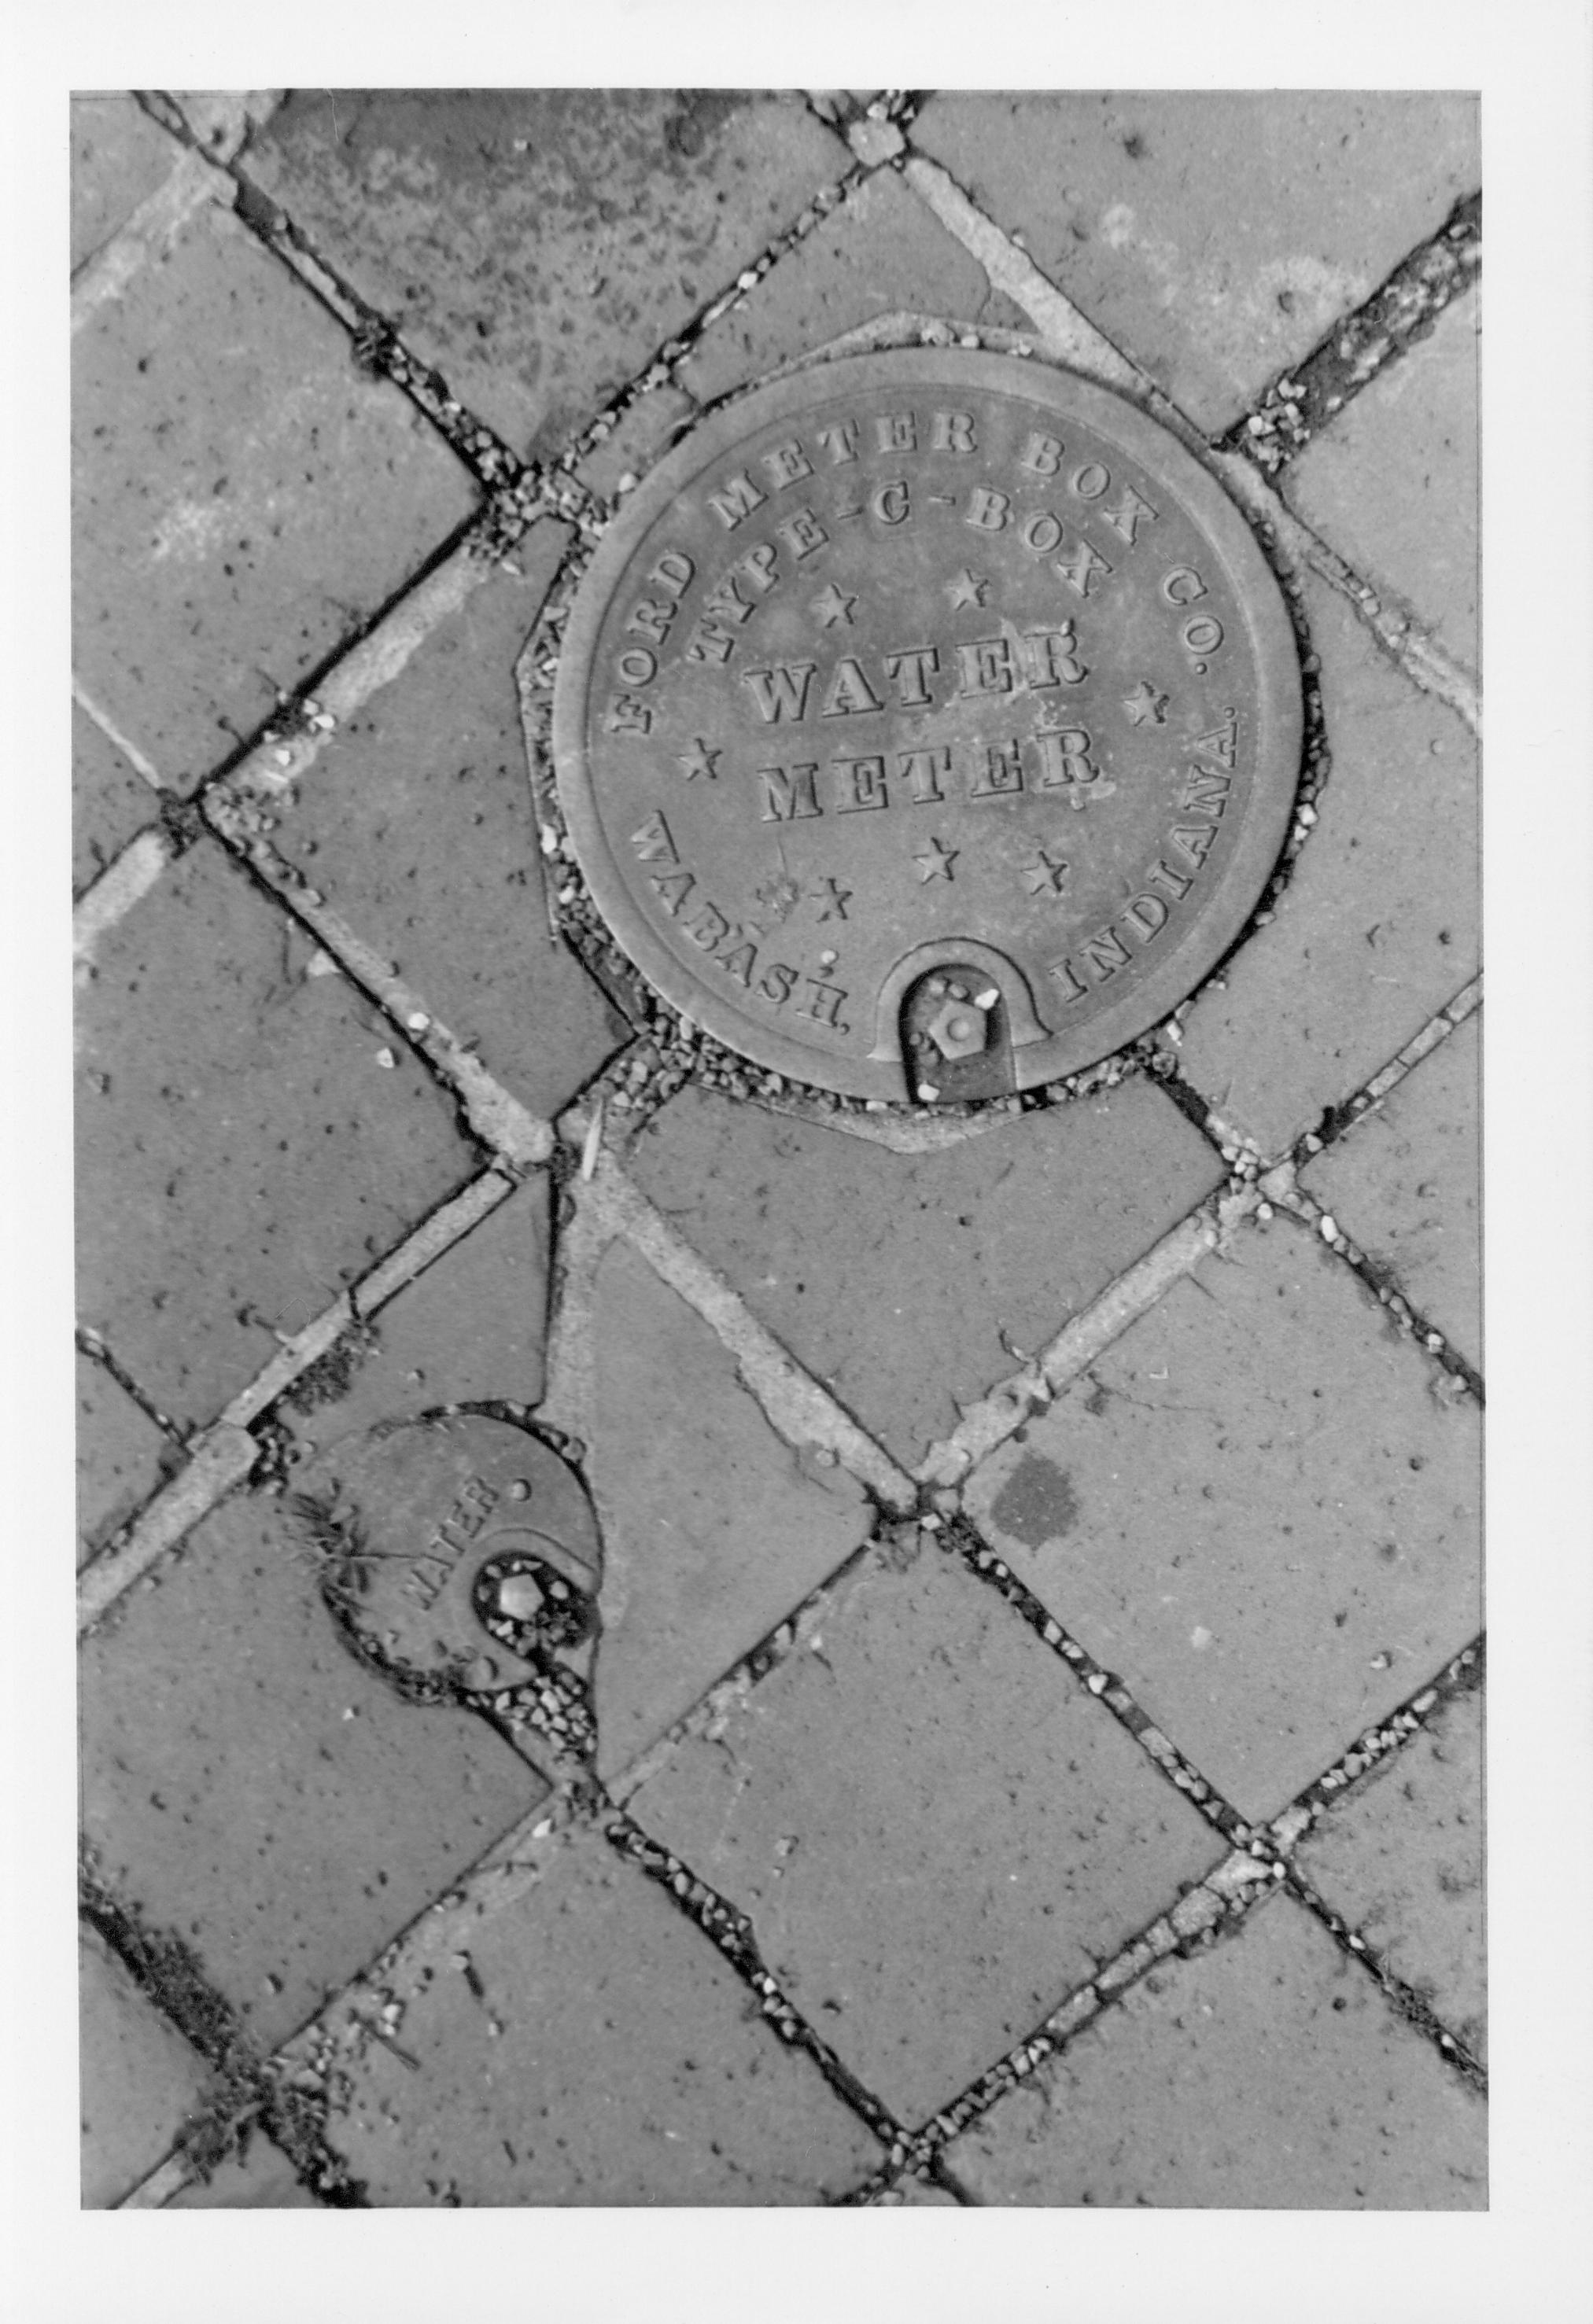 The Lincoln Home water meter, prior to the 1987-88 restoration.